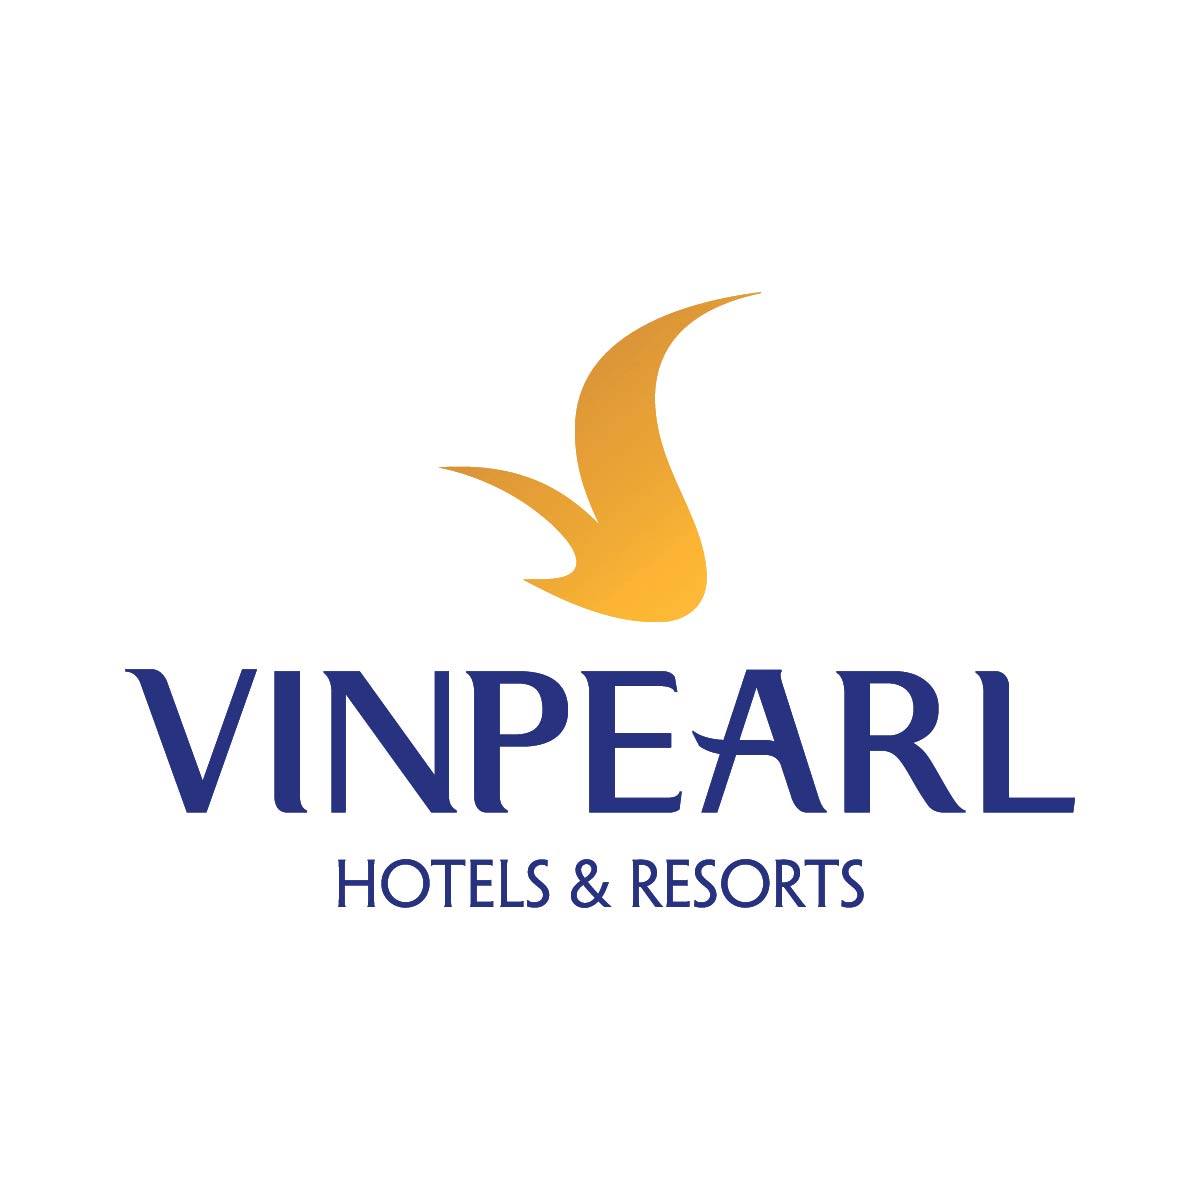 Vinpearl Golf course